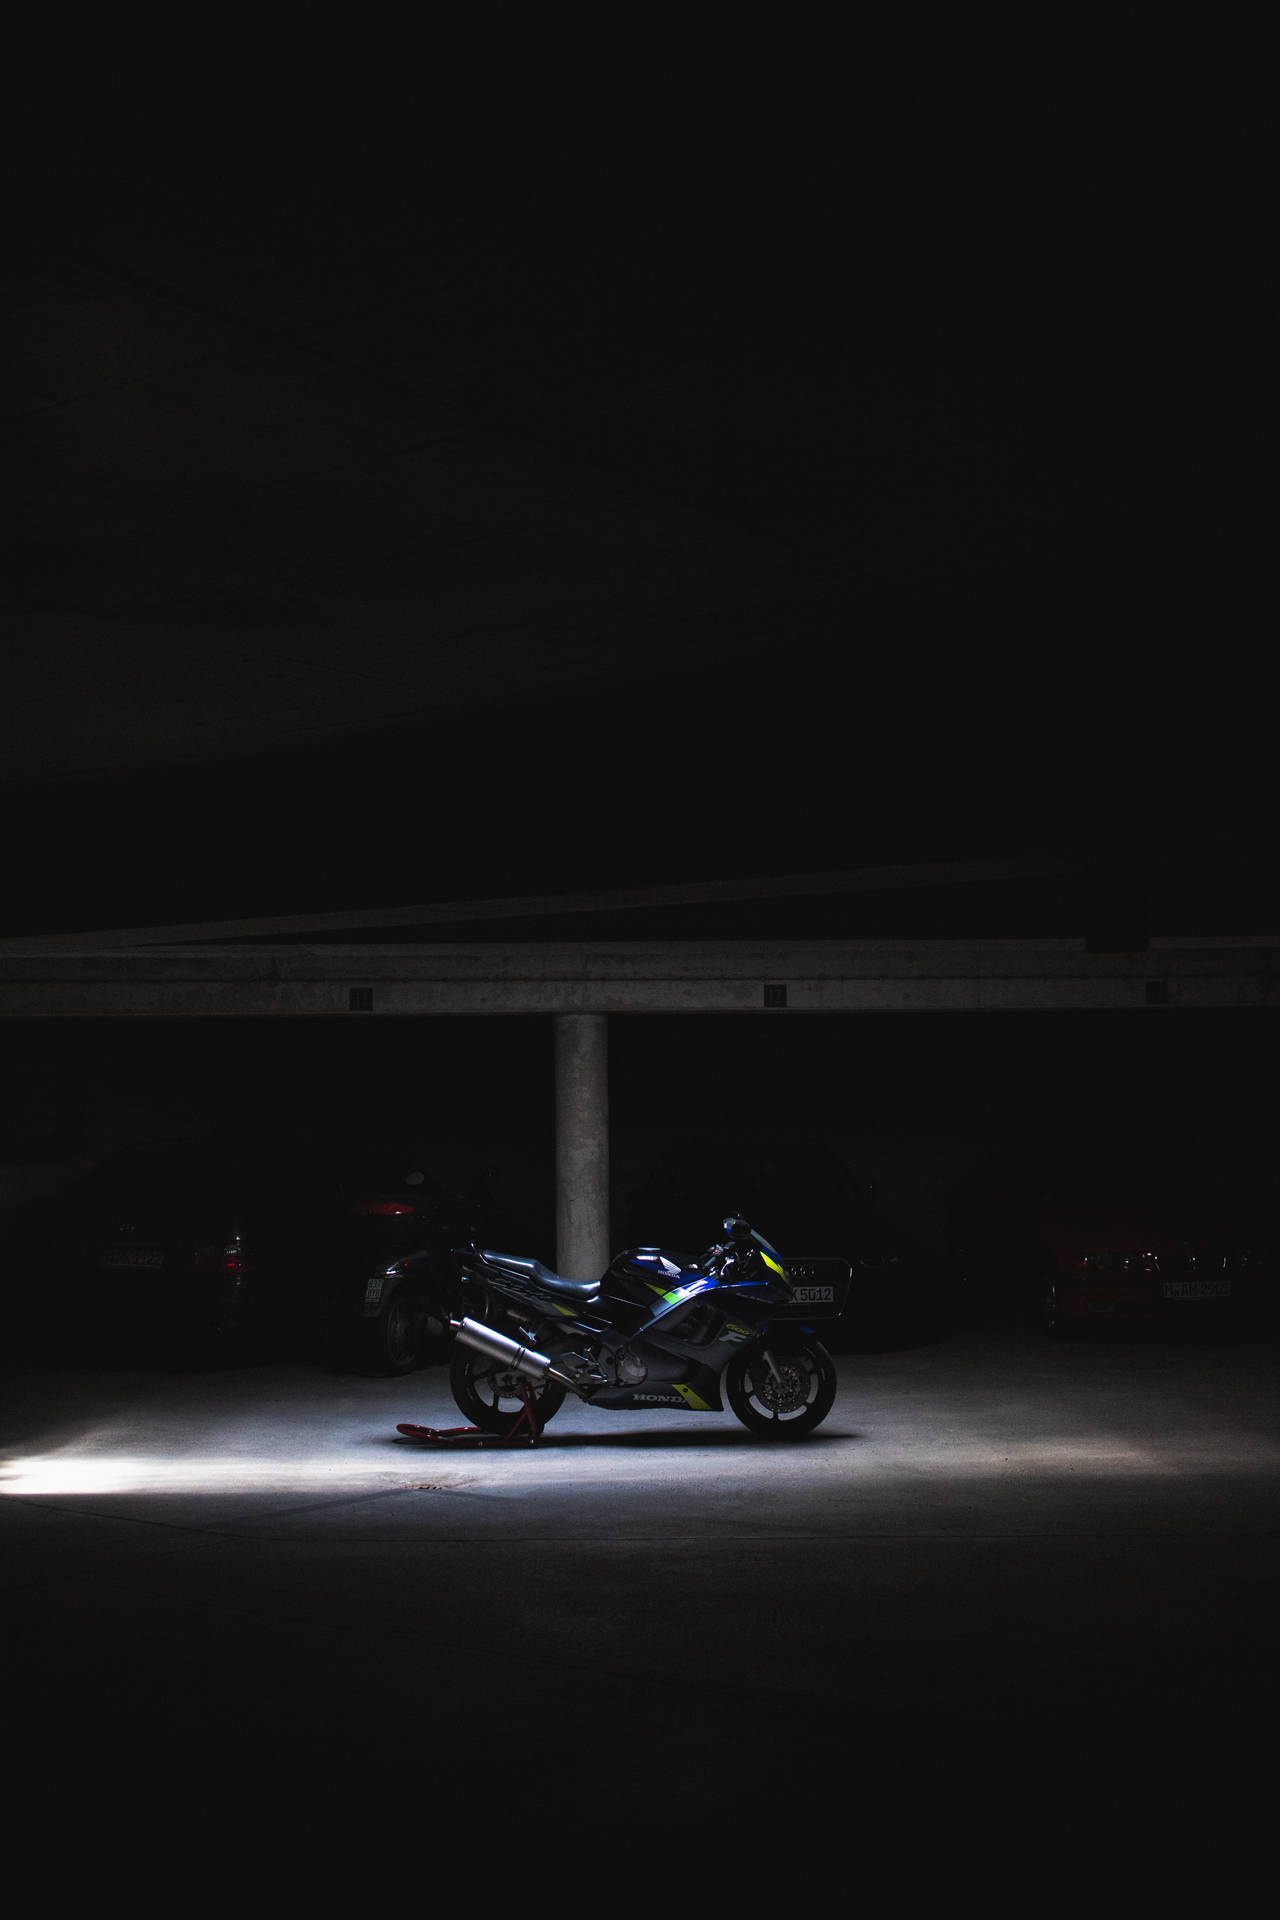 Motorcycle 3680X5520 Wallpaper and Background Image